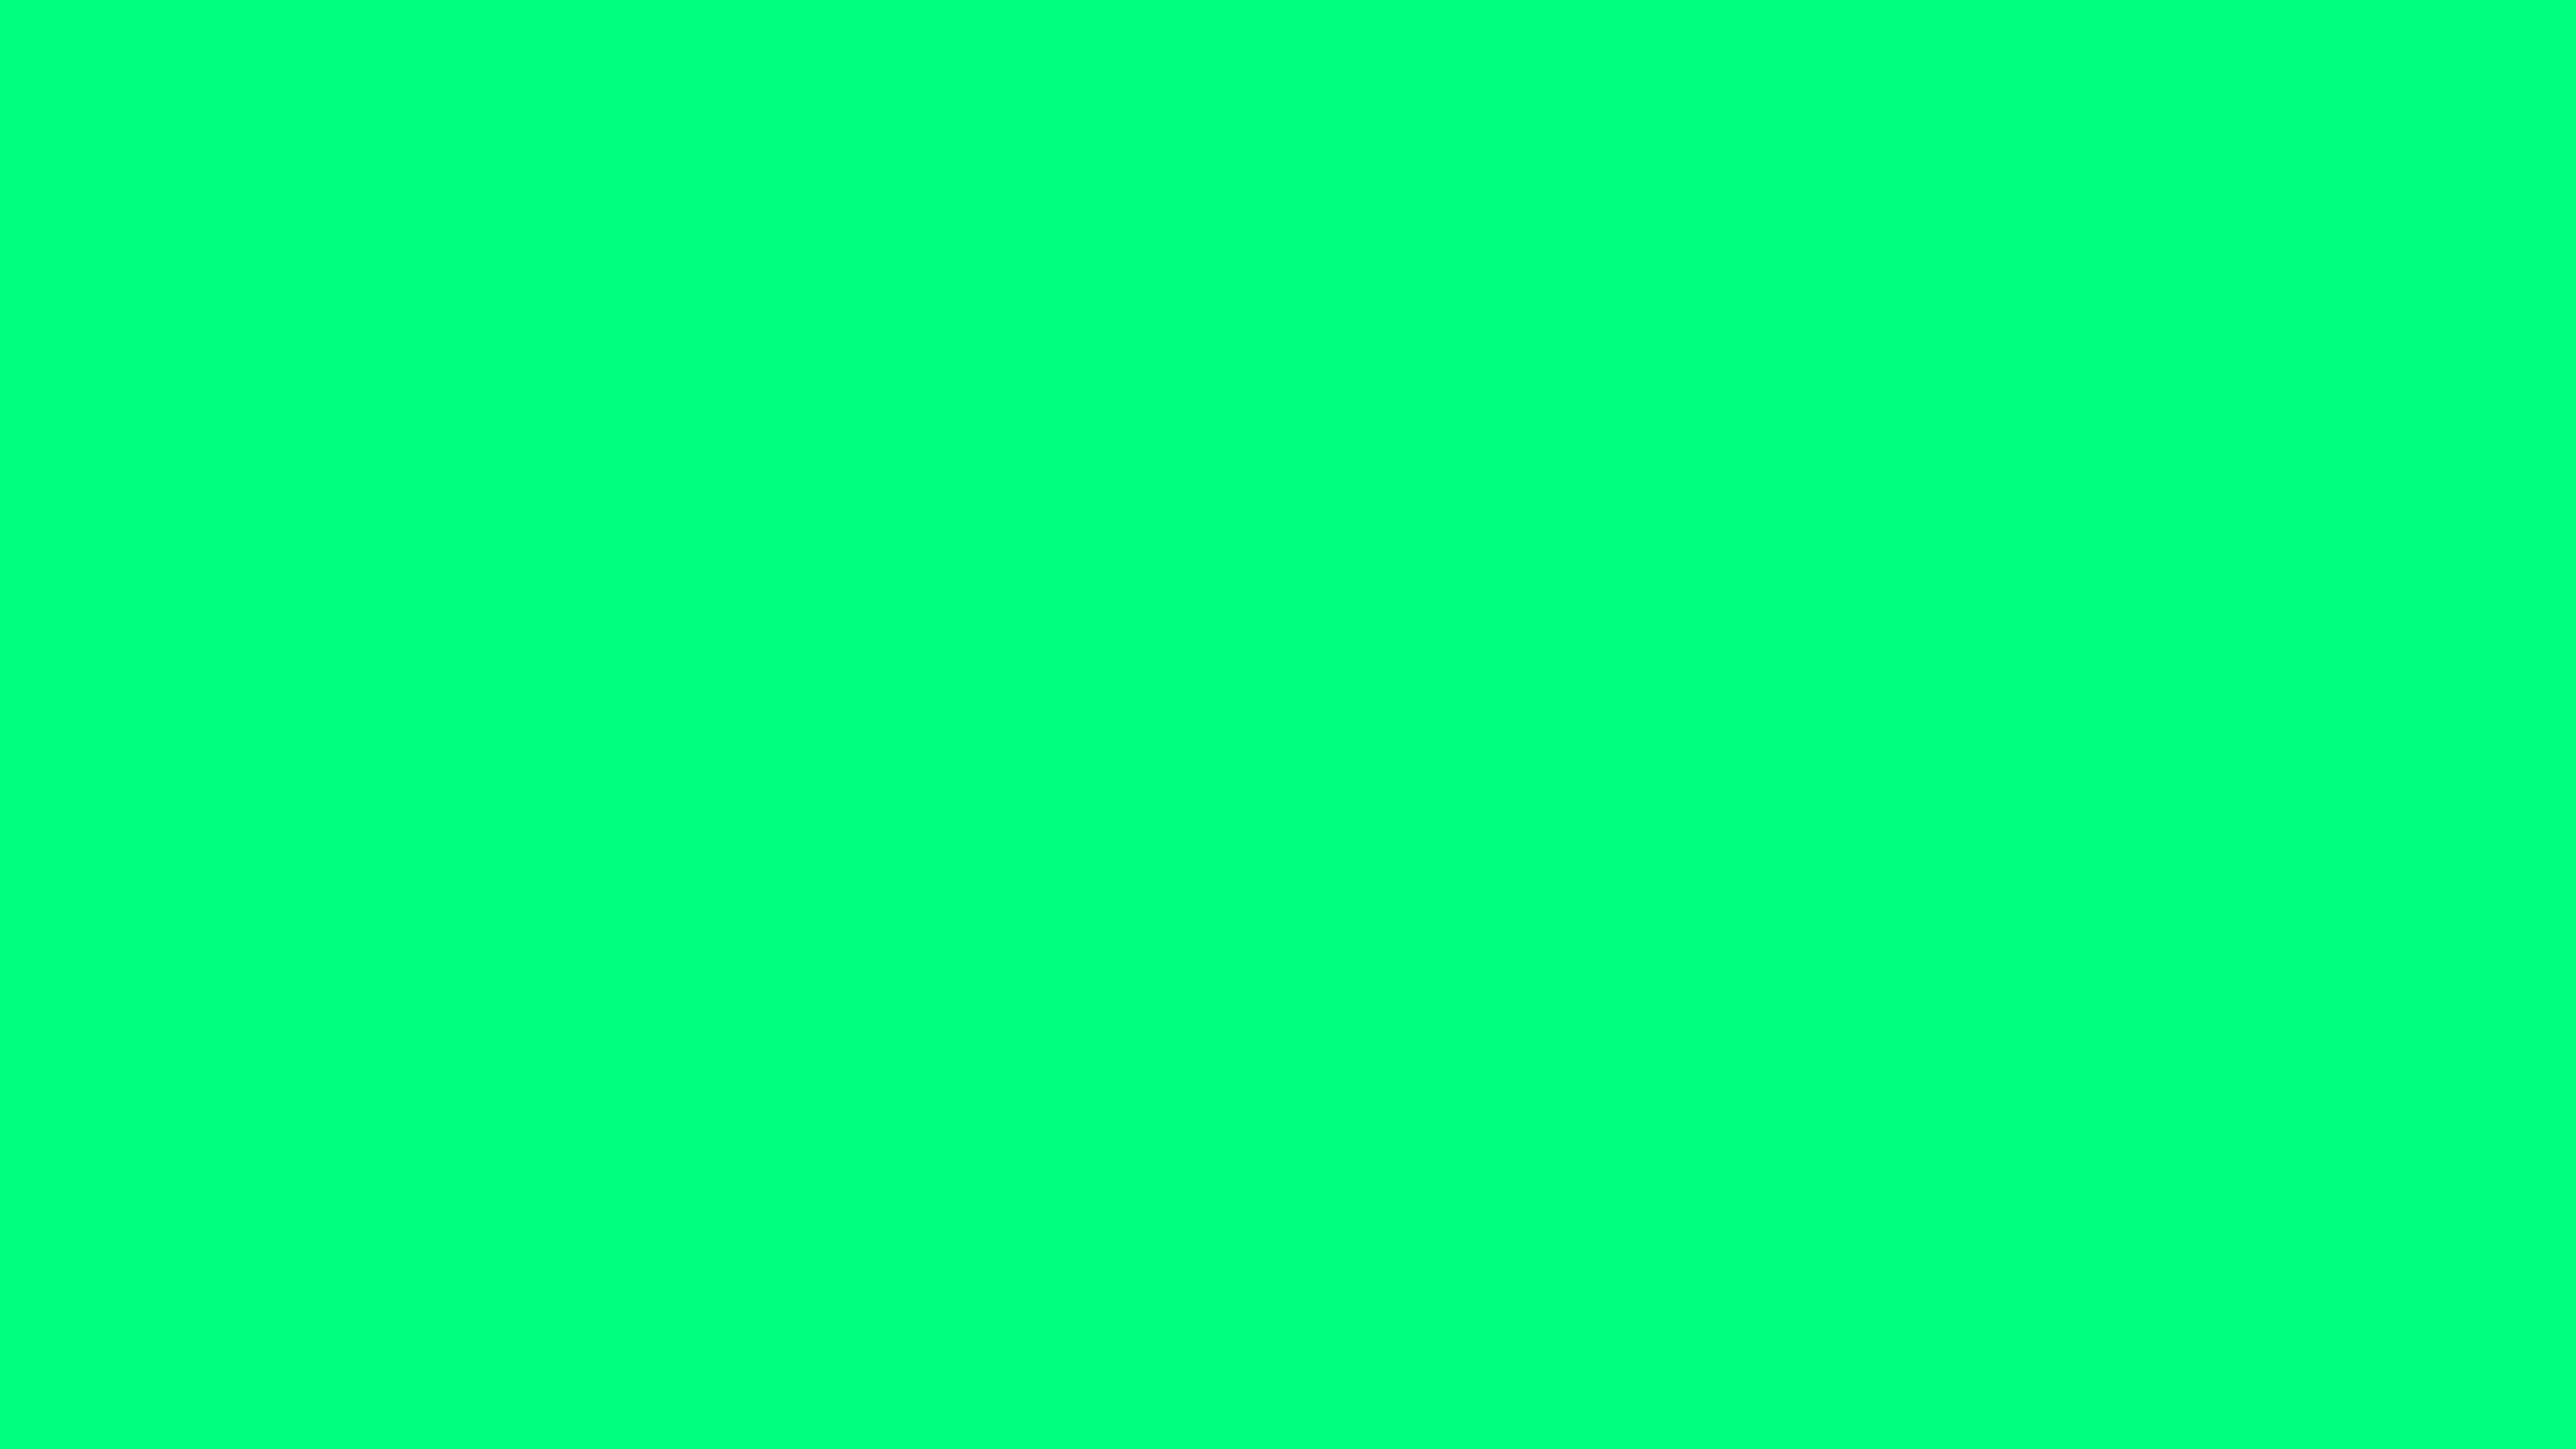 7680x4320 Spring Green Solid Color Background